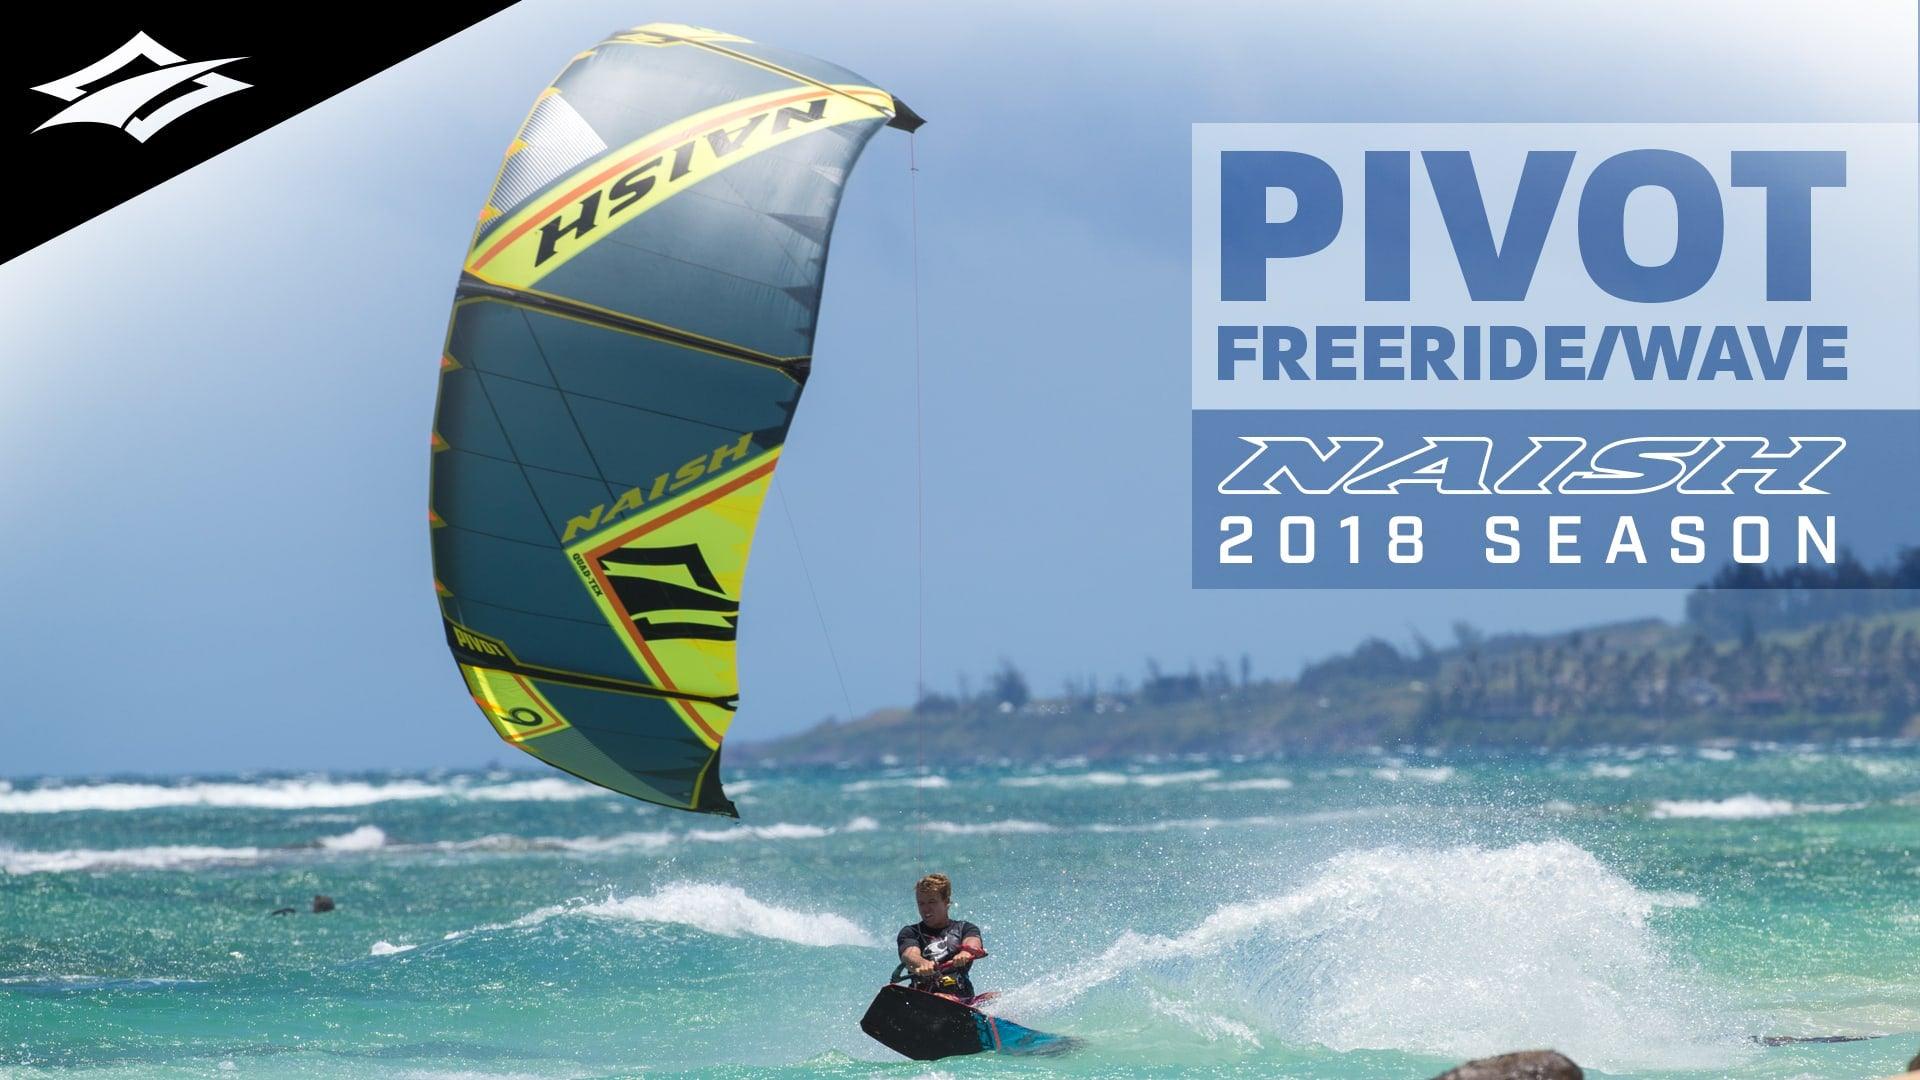 Ready for Anything | Jesse Richman Puts His 2018 Pivot to the Test - Naish.com